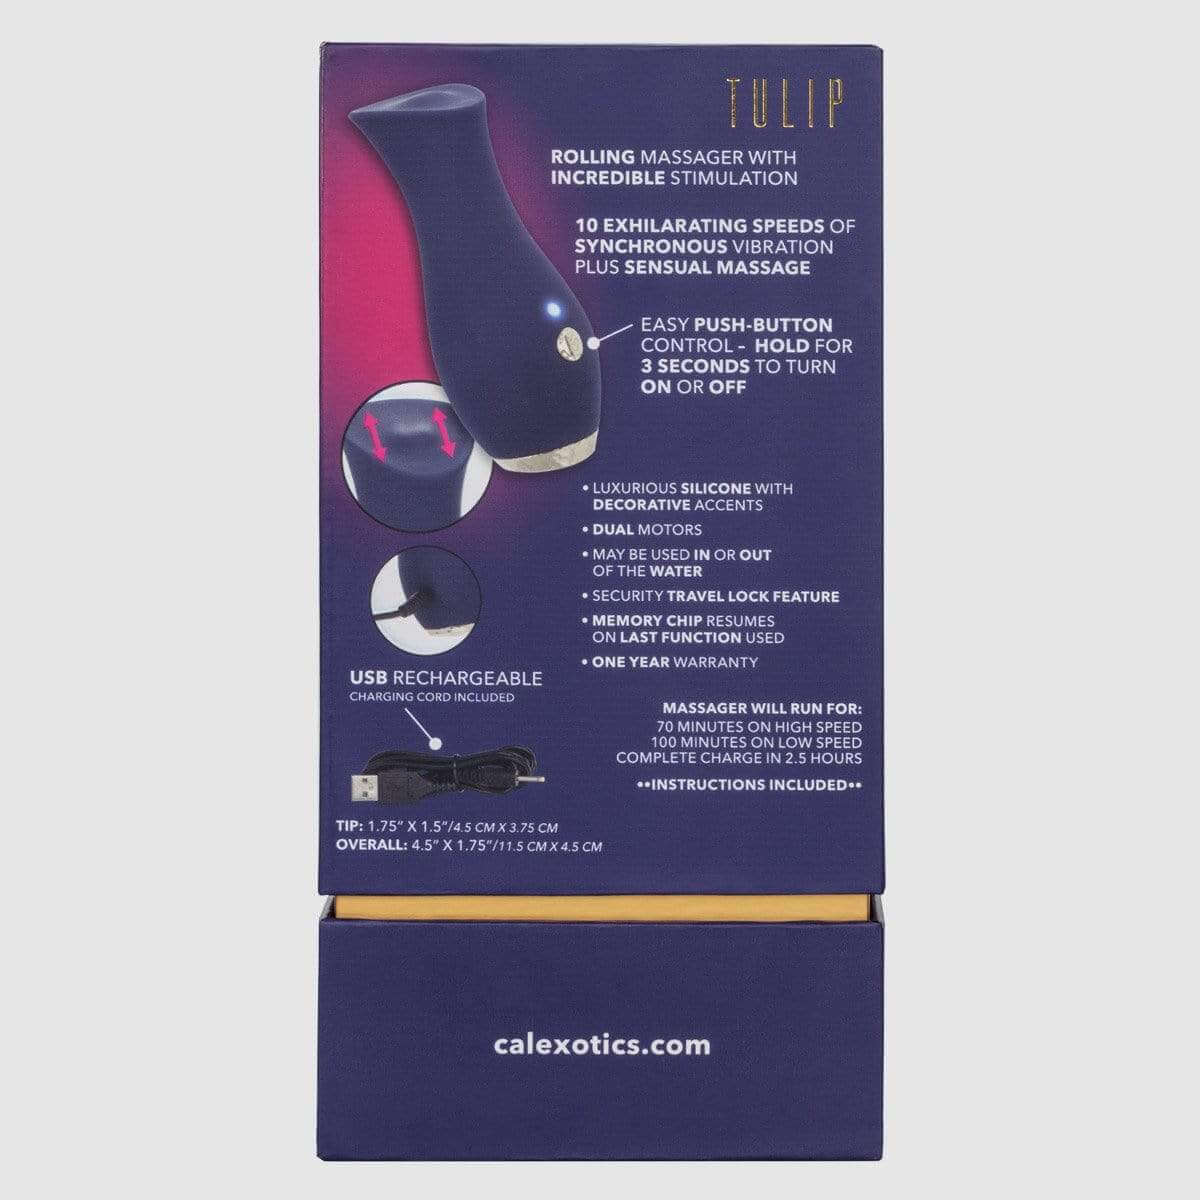 Chic Tulip 10 Speeds Dual Motors Massager - Thorn & Feather Sex Toy Canada